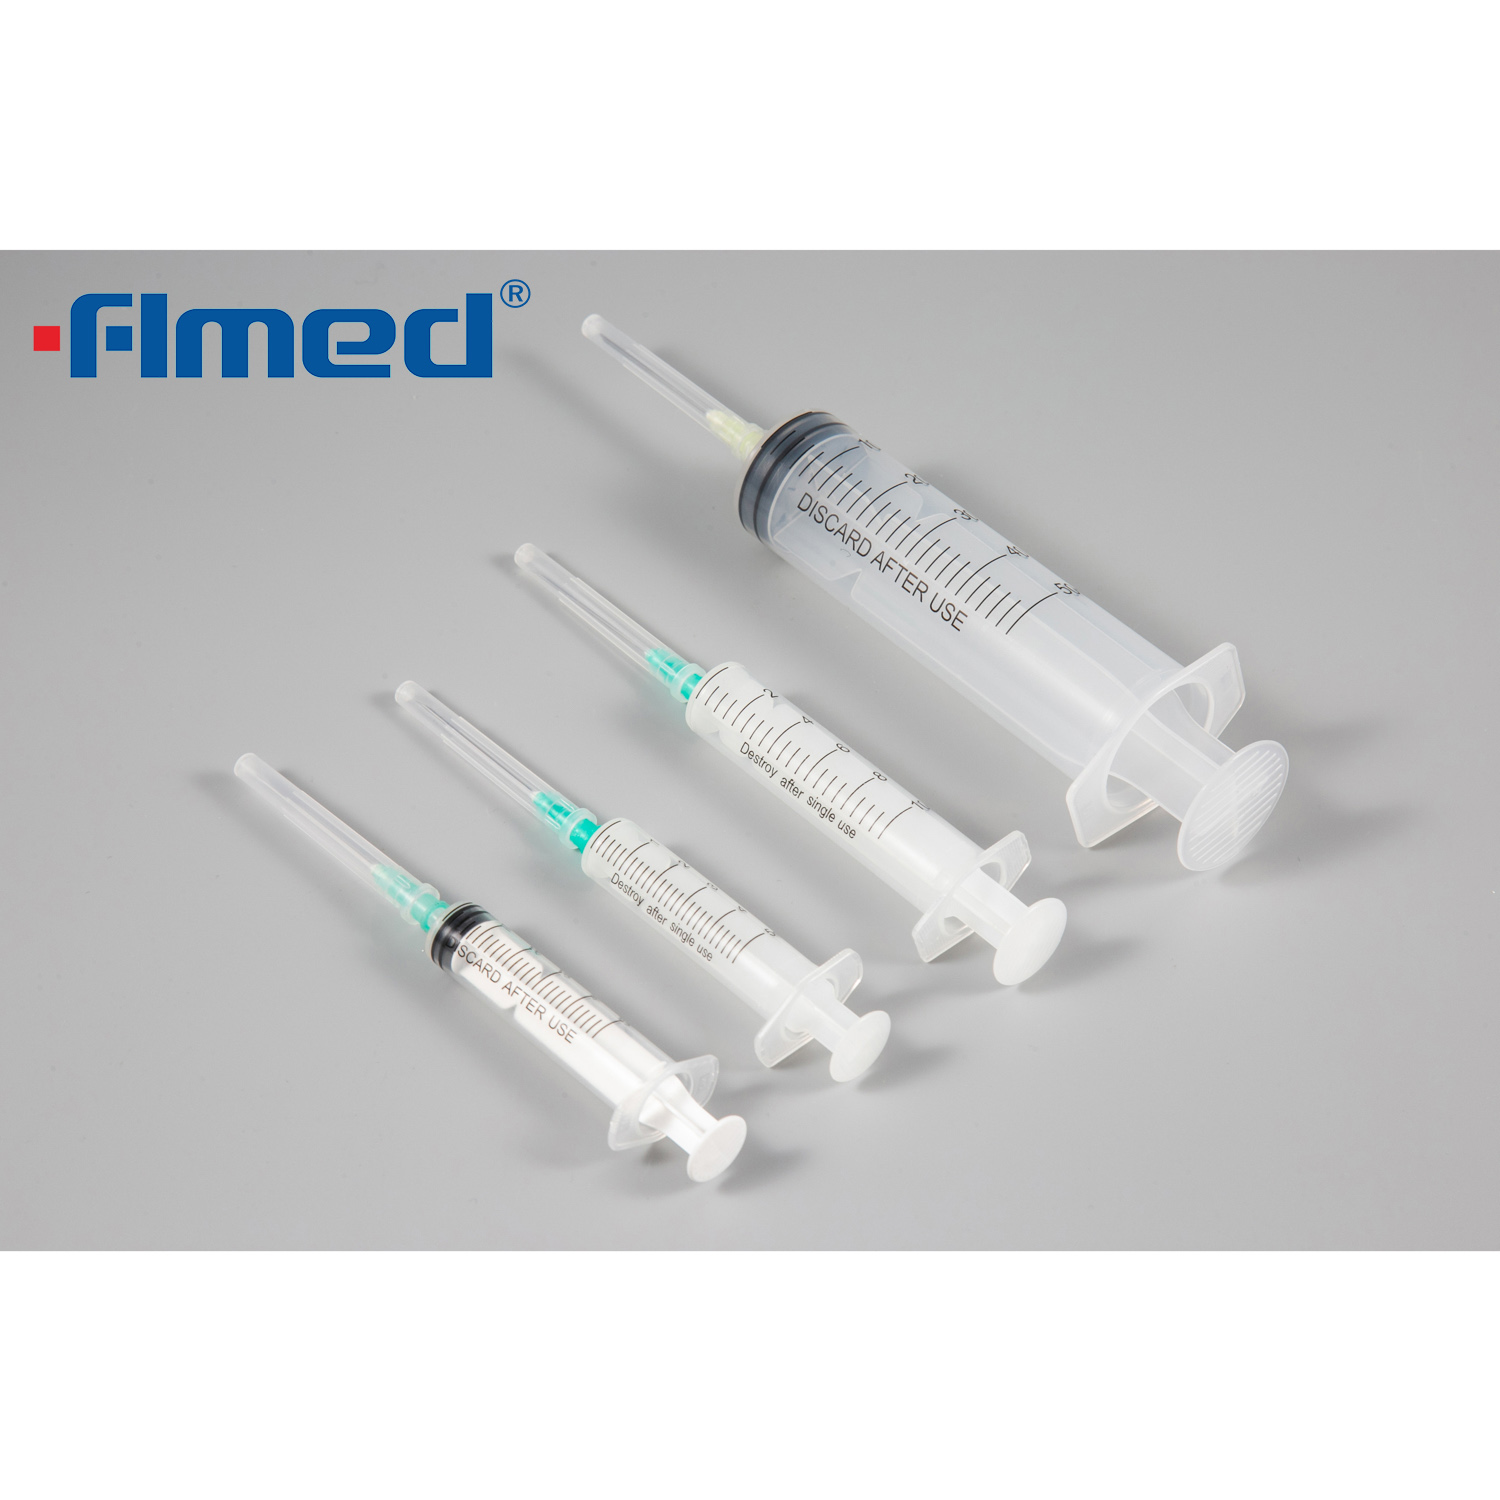 Bulk Buy China Wholesale Single Used Syringes With Needle In Different  Capacity For Medical Use, Disposable And Sterile $0.07 from WinHealth  Medical (Suzhou) Technology Co.,Ltd